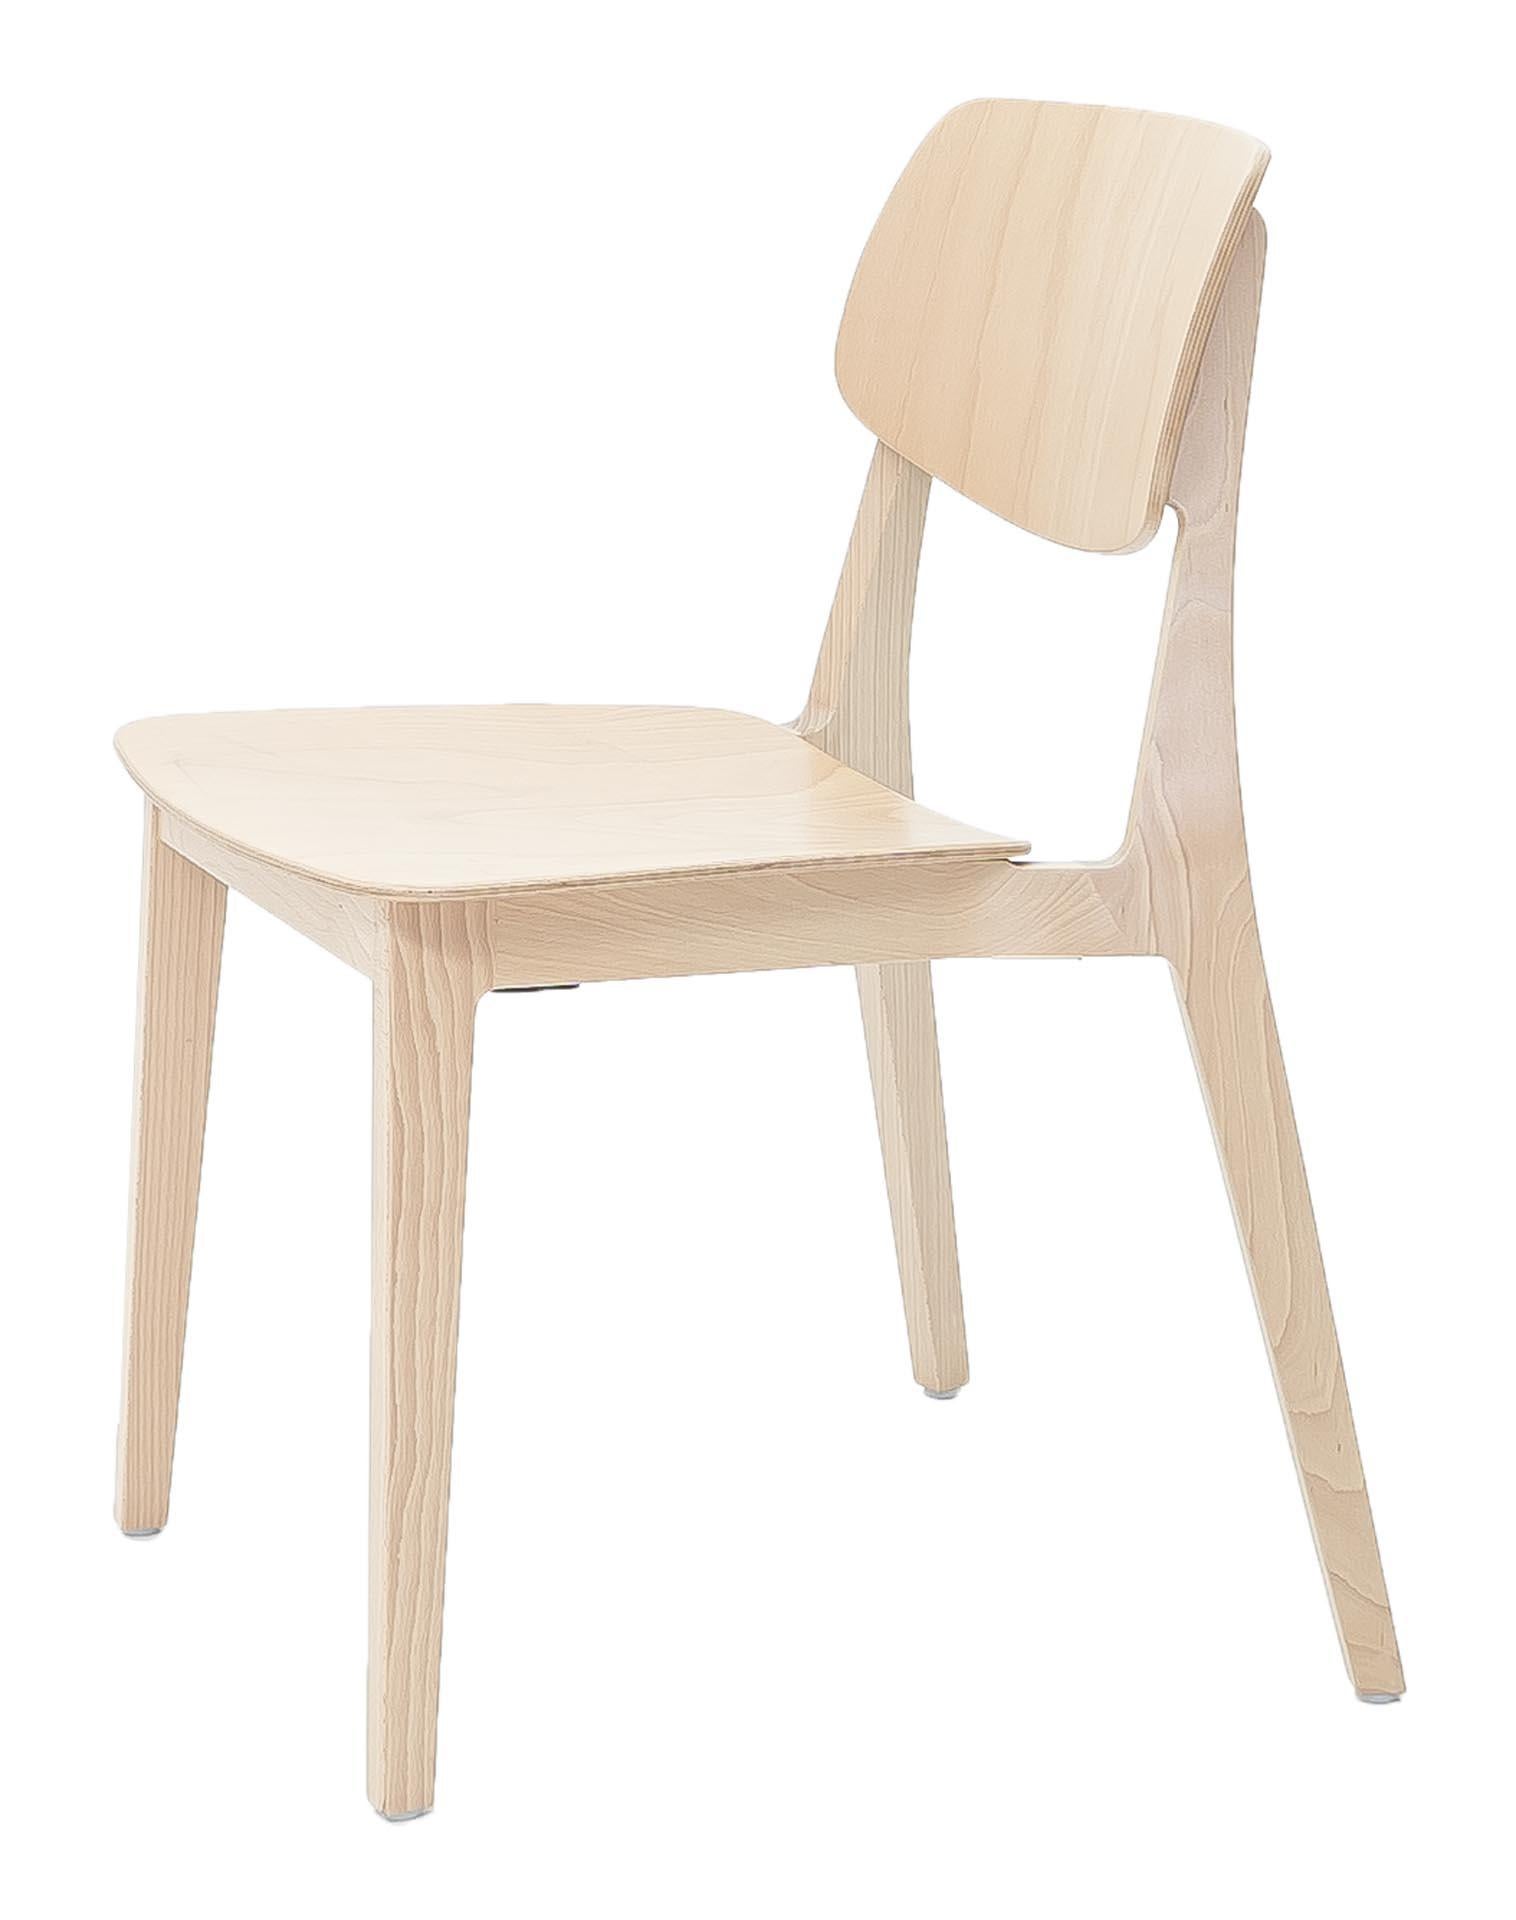 The Felber C14 chair is a Classic and timeless piece of Swiss design.

It is a reedition of the 1940s Classic Dietiker chair. Engineered as patented modular furniture. The seat and back are exchangeable.

The Felber C14 series is a masterpiece of